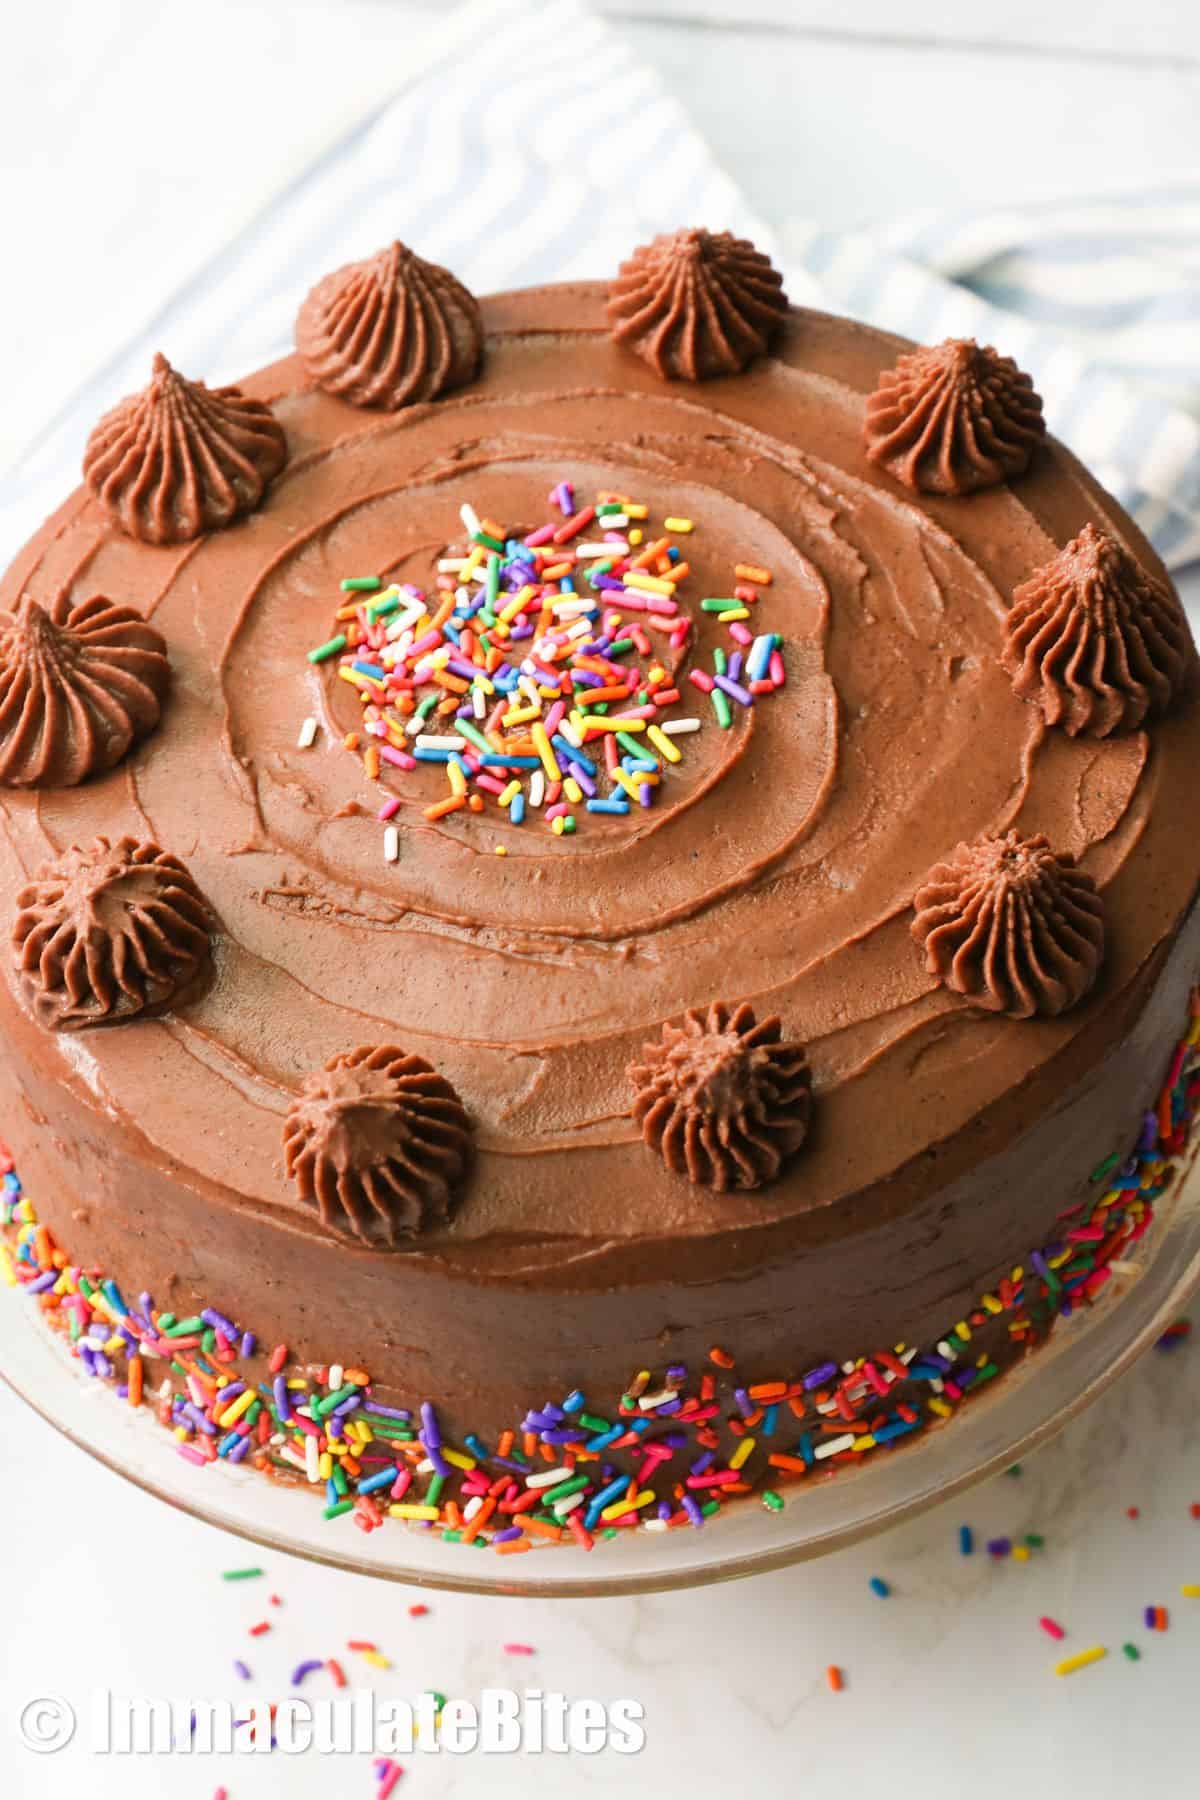 A whole yellow cake with chocolate frosting and sprinkles